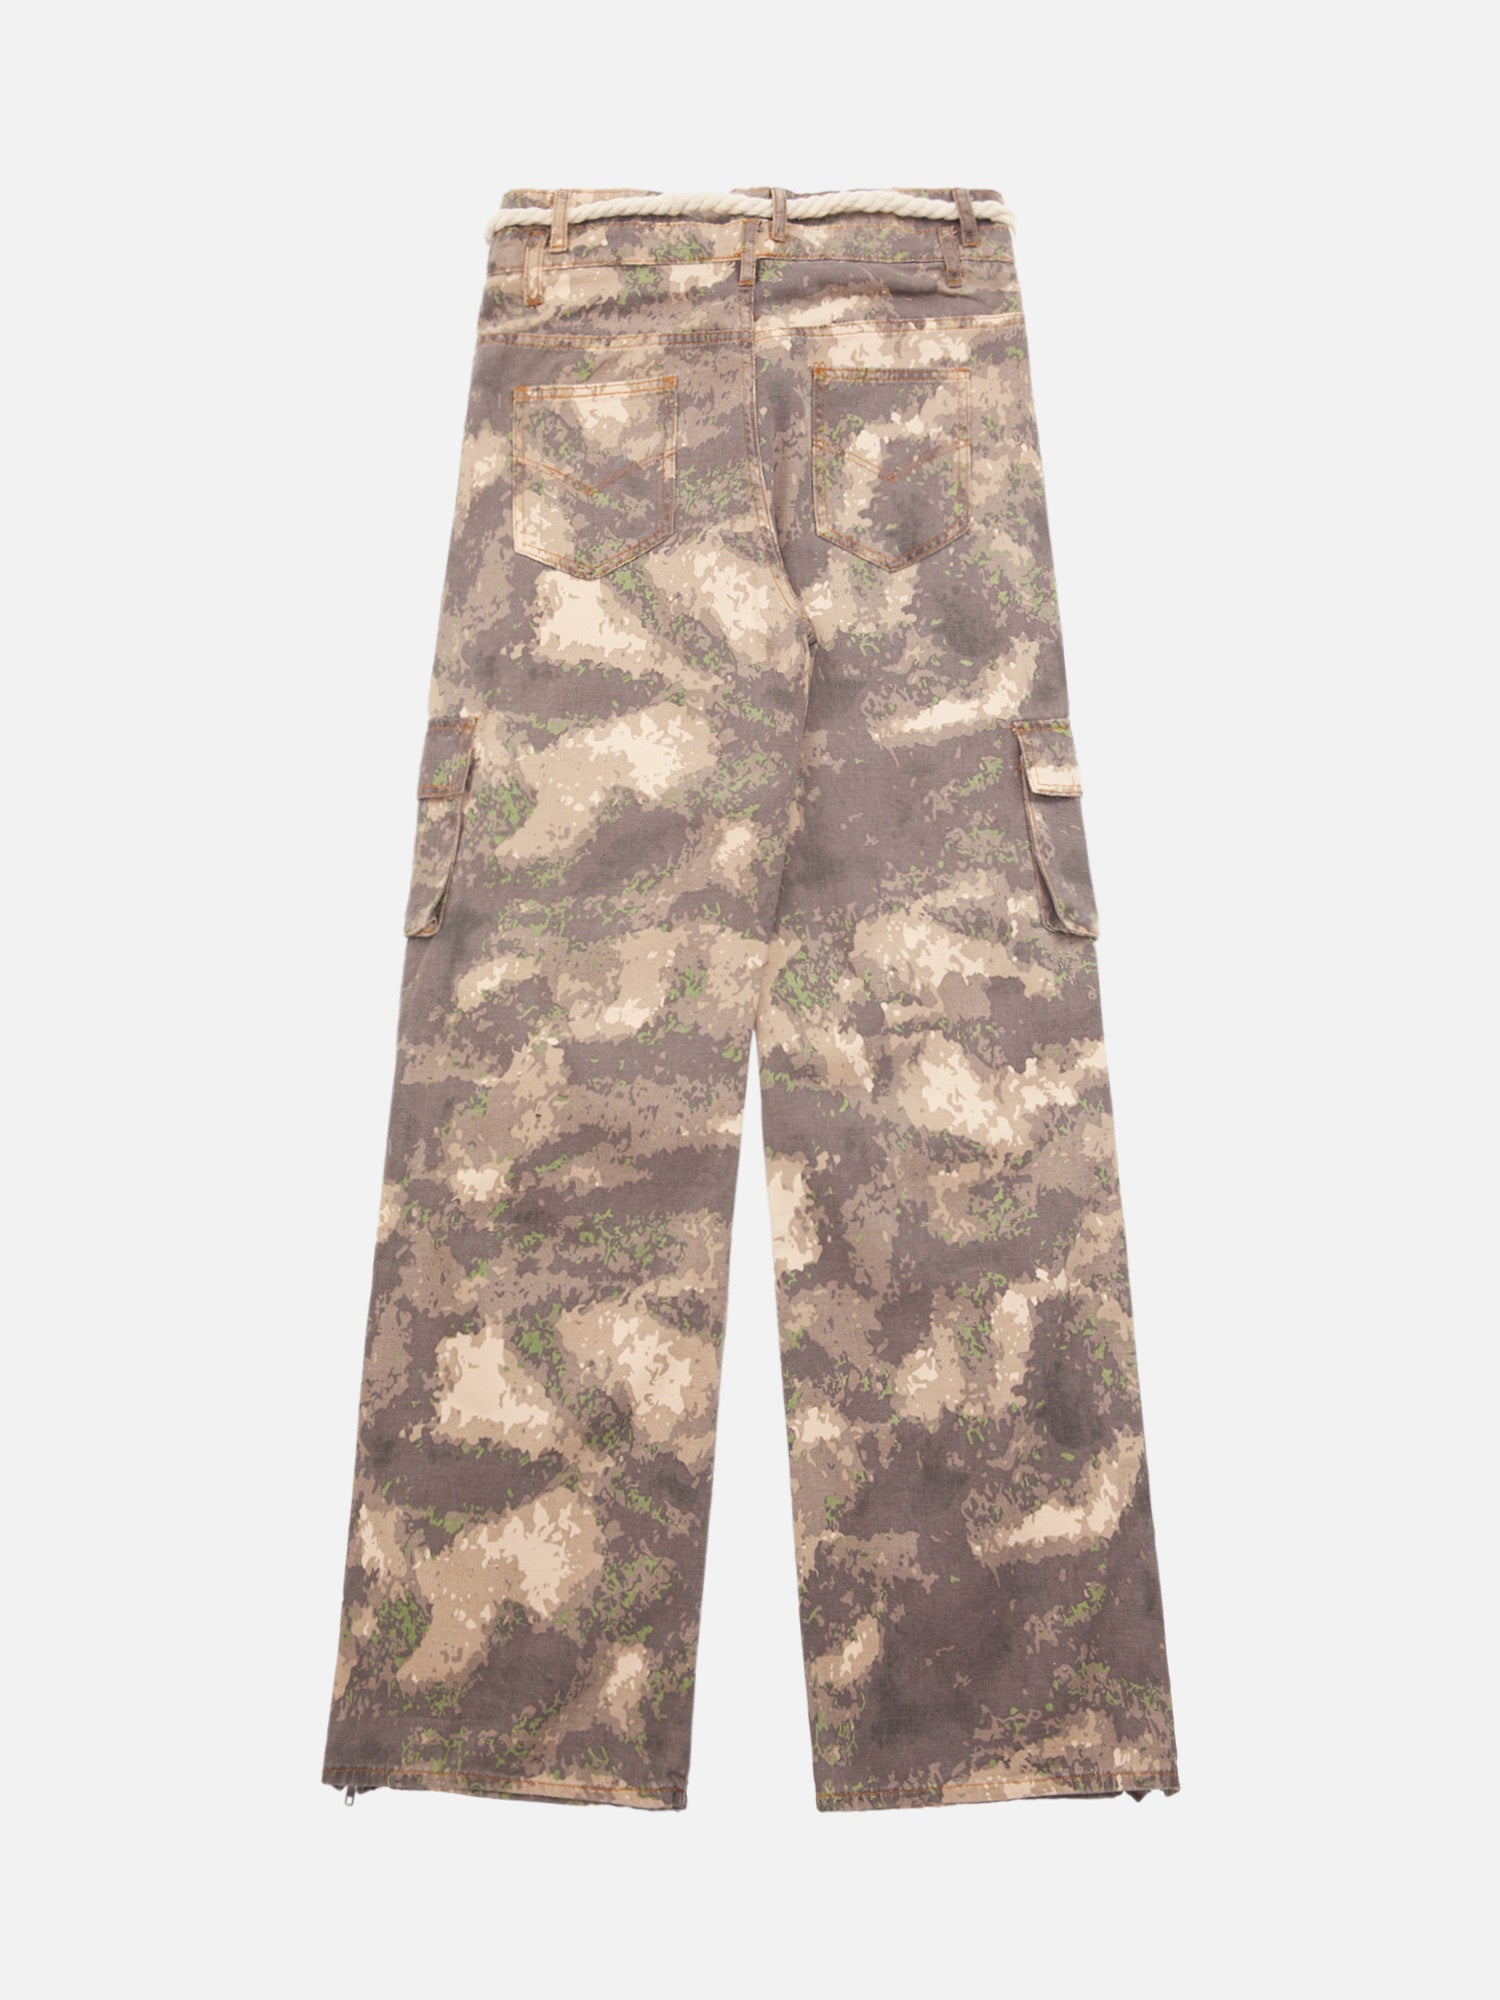 Thesupermade American High Street Drawstring Camouflage Overalls